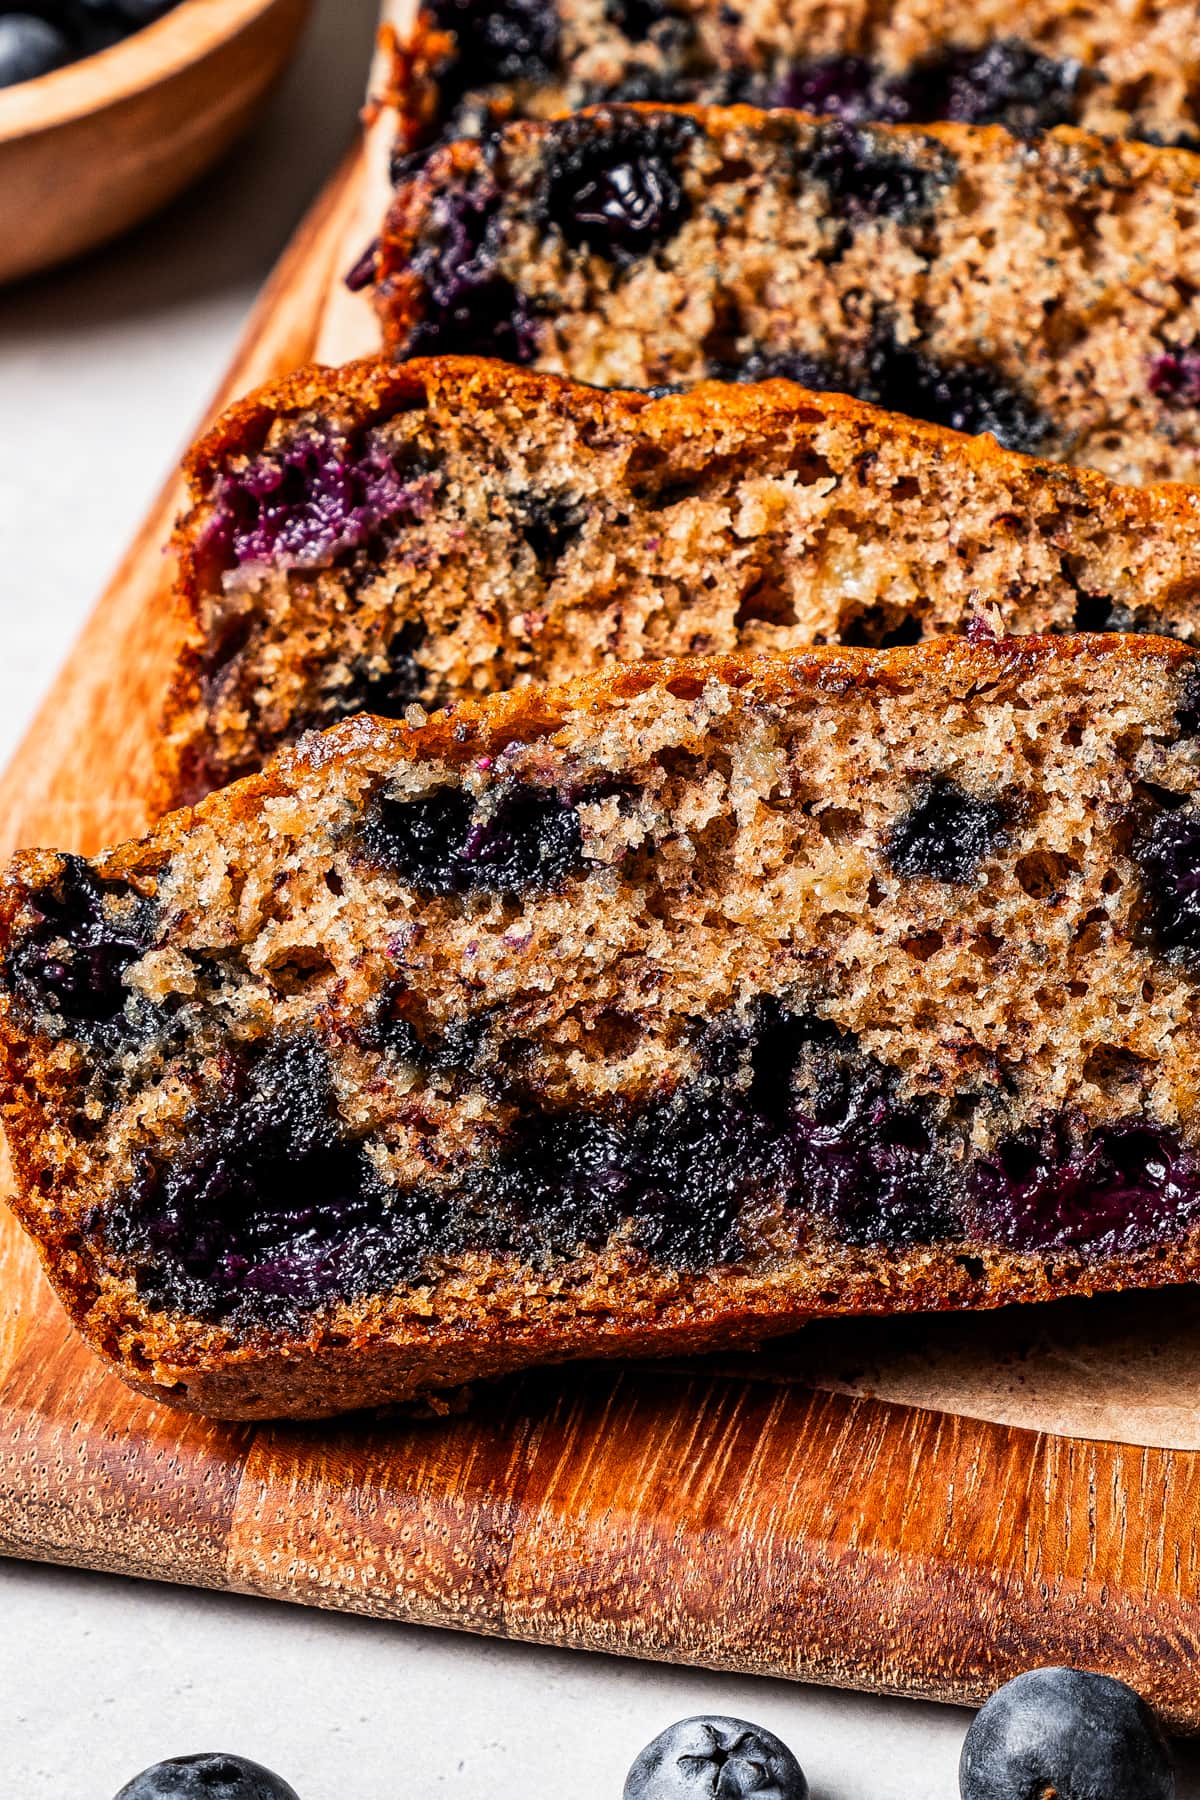 Close-up view of a loaf of blueberry banana bread cut into slices on a wooden platter.